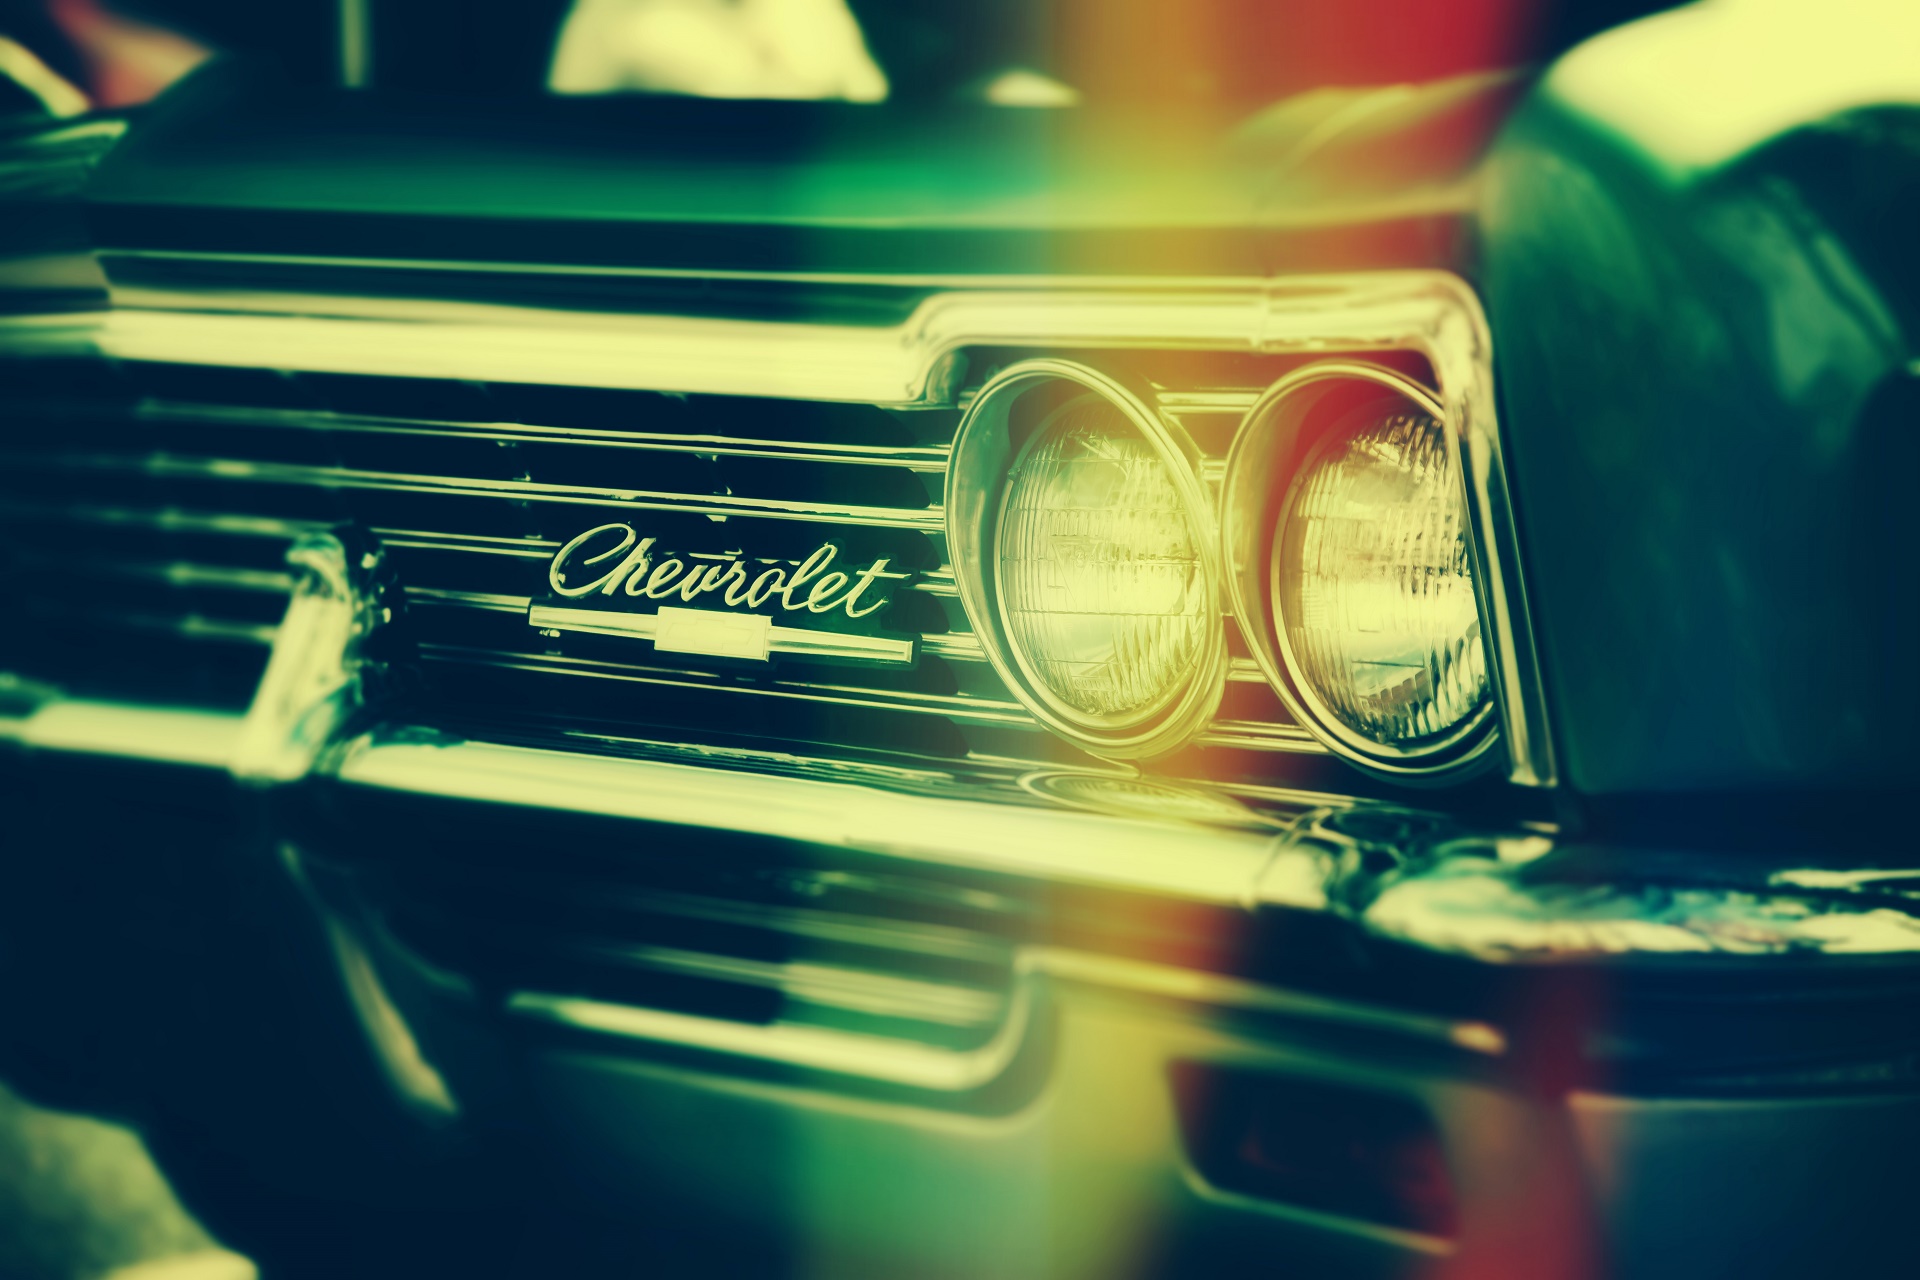 670+ Classic Car HD Wallpapers and Backgrounds